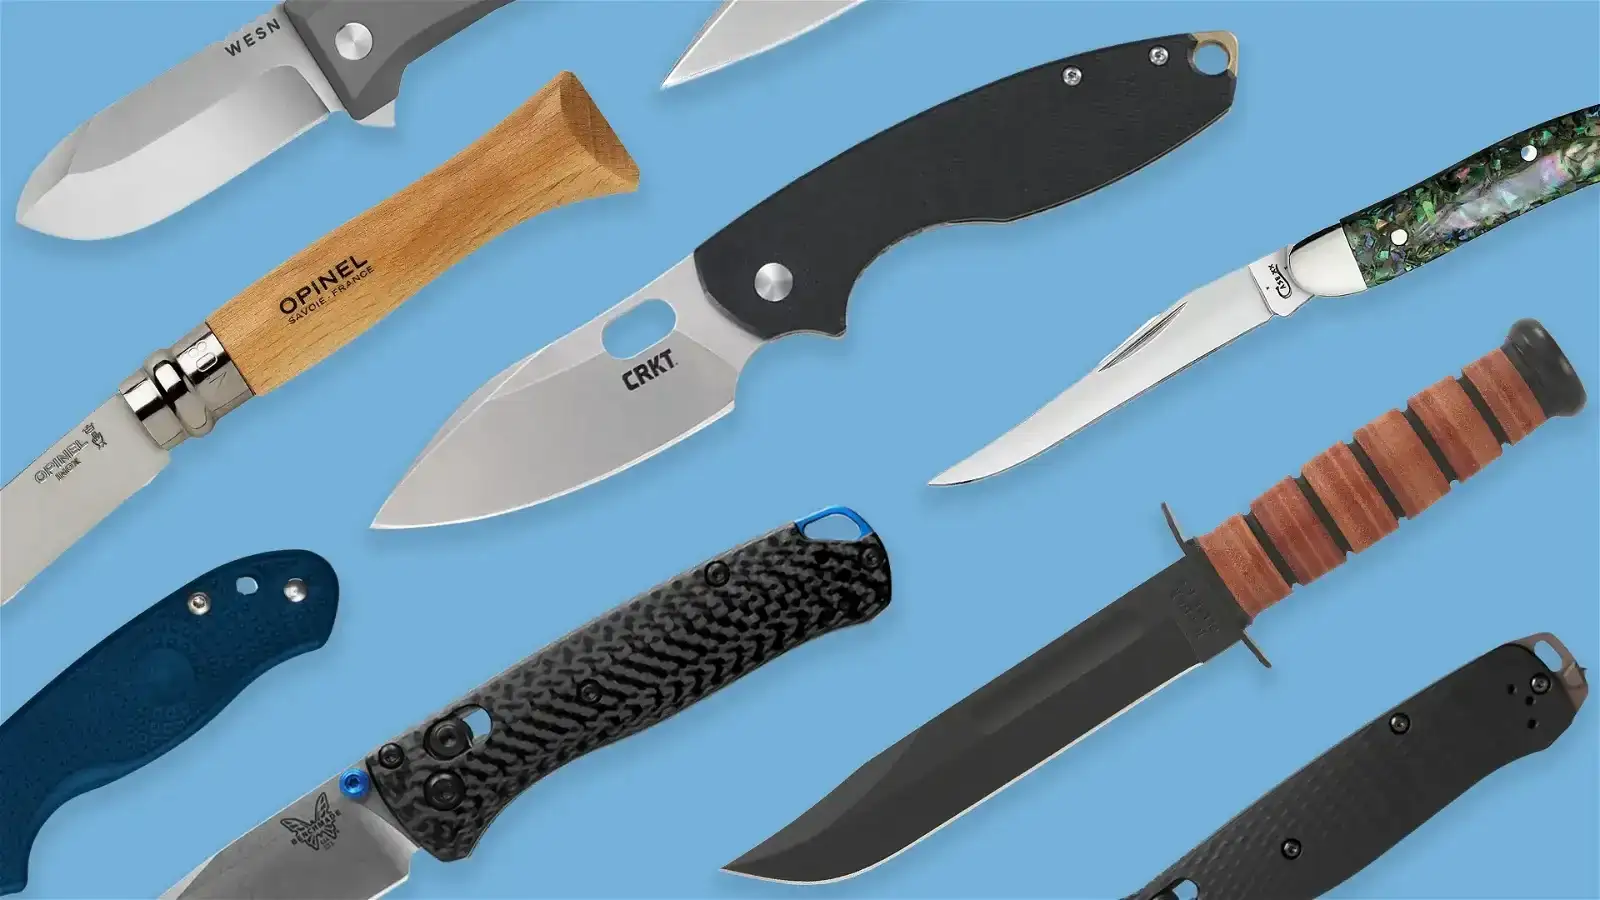 The Complete Guide to Common Knife Handle Materials | Gear Patrol